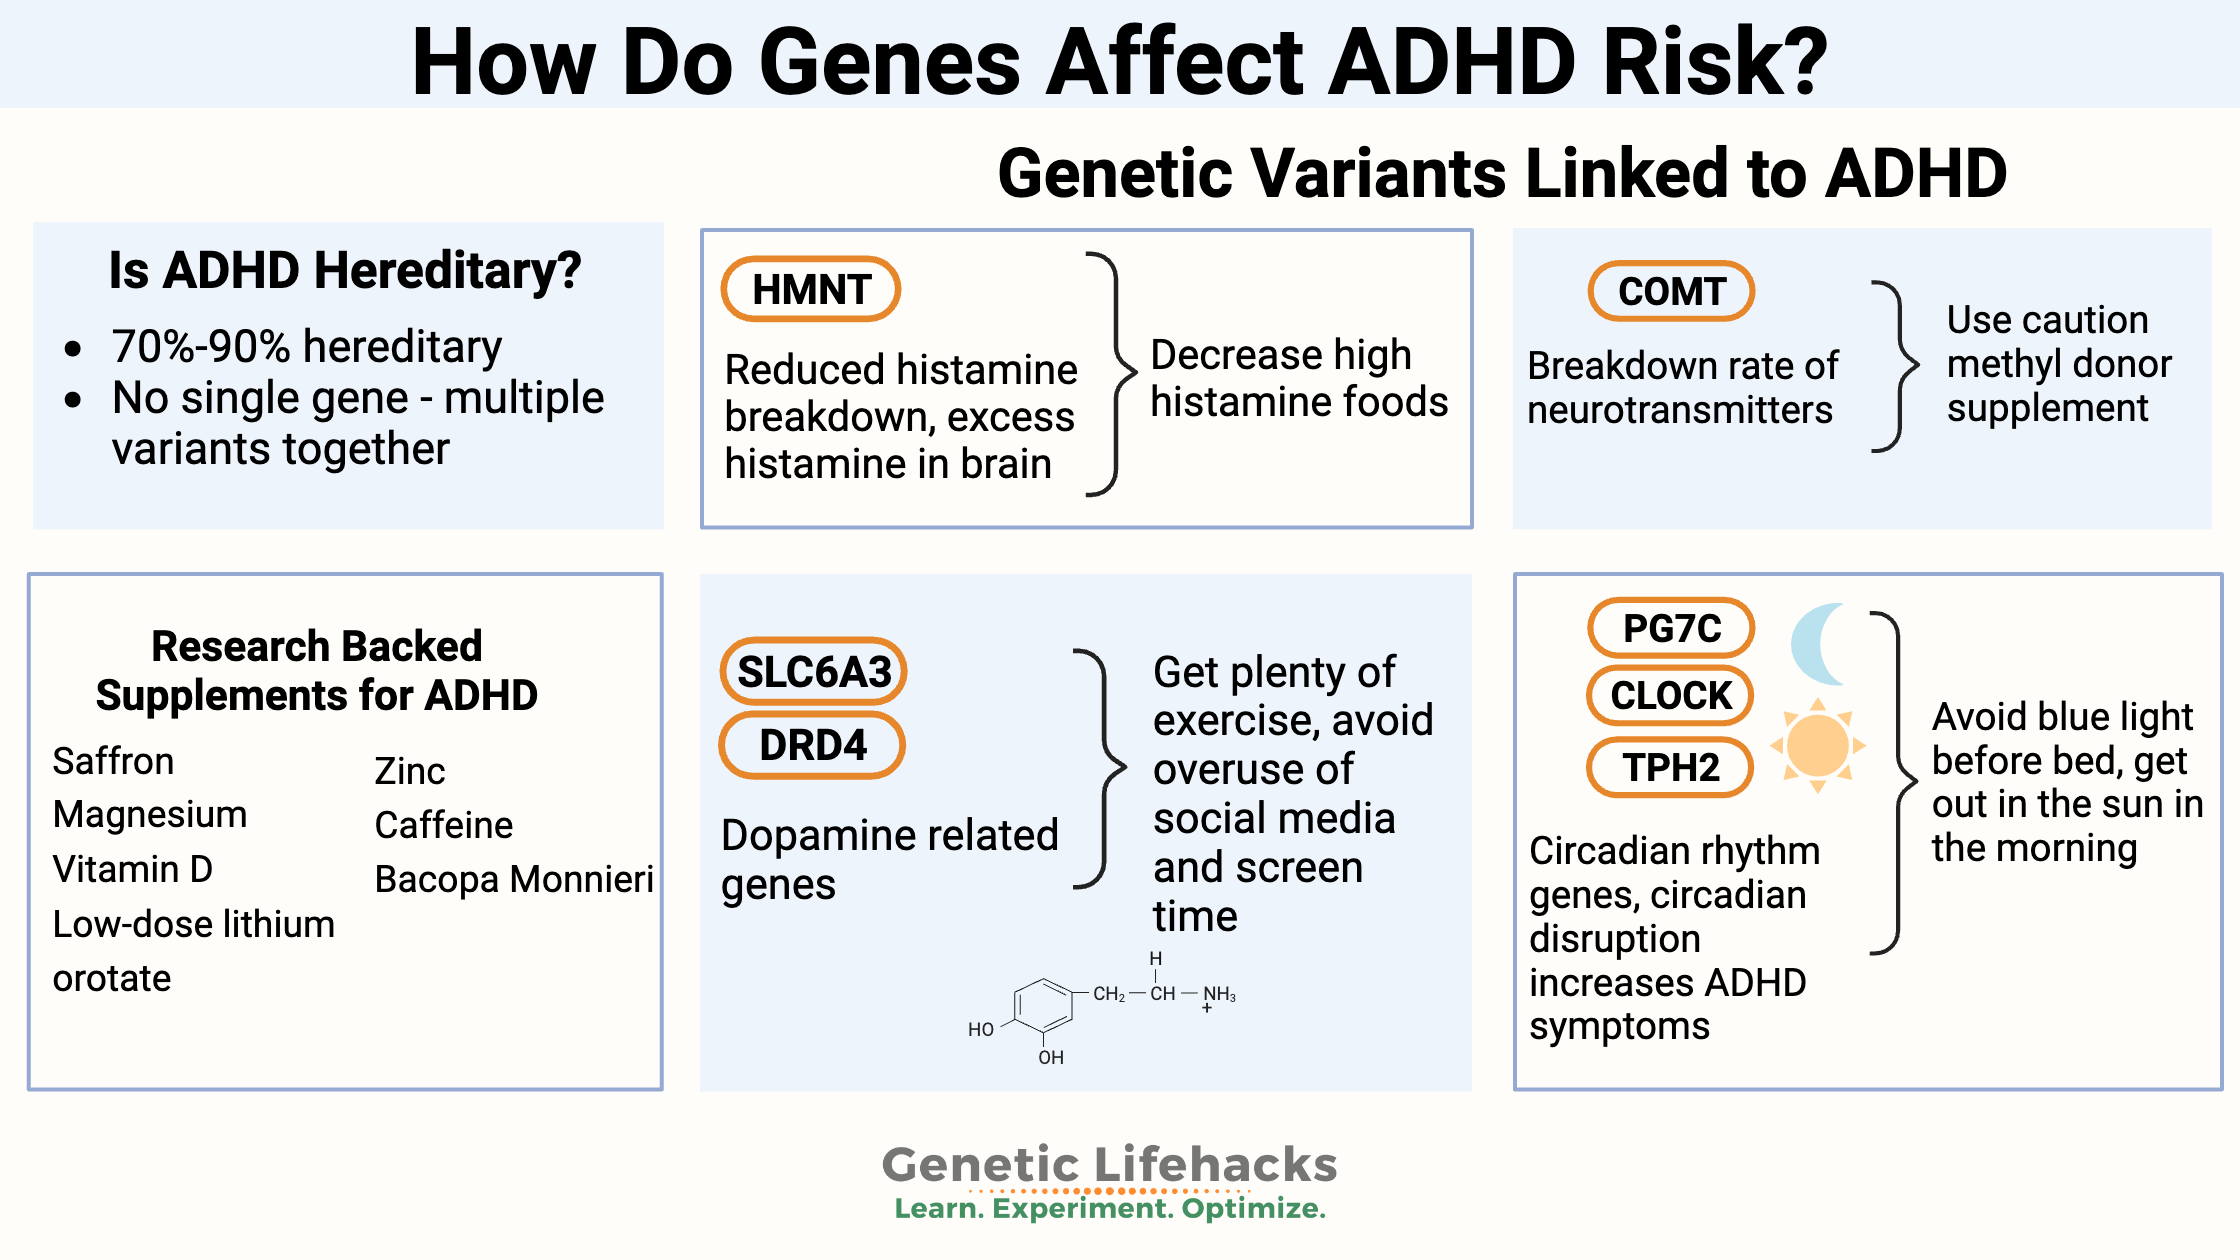 ADHD genetics and heritability, supplements for ADHD